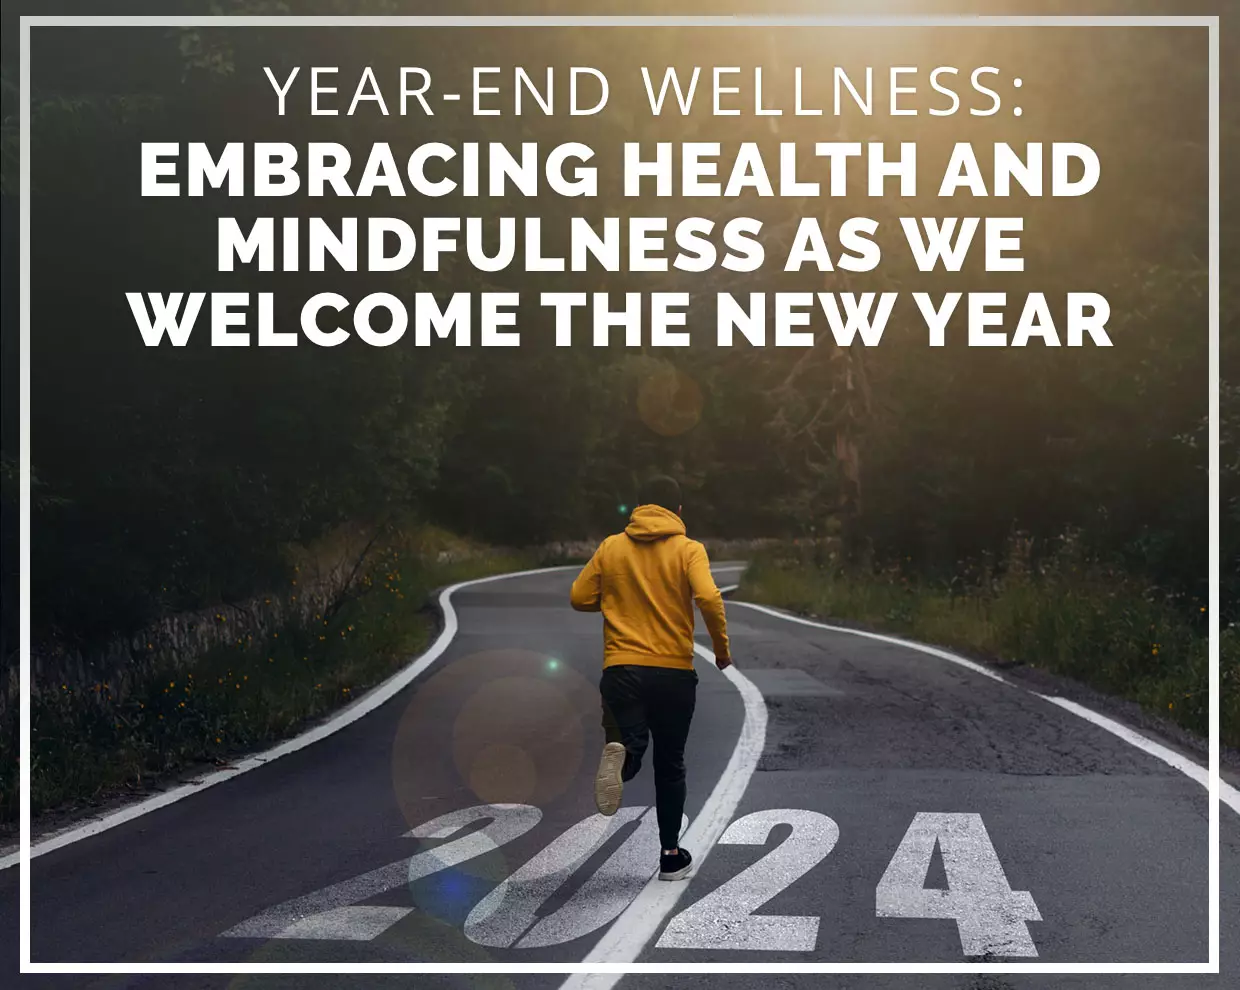 Year-End Wellness: Embracing Health and Mindfulness as We Welcome the New Year